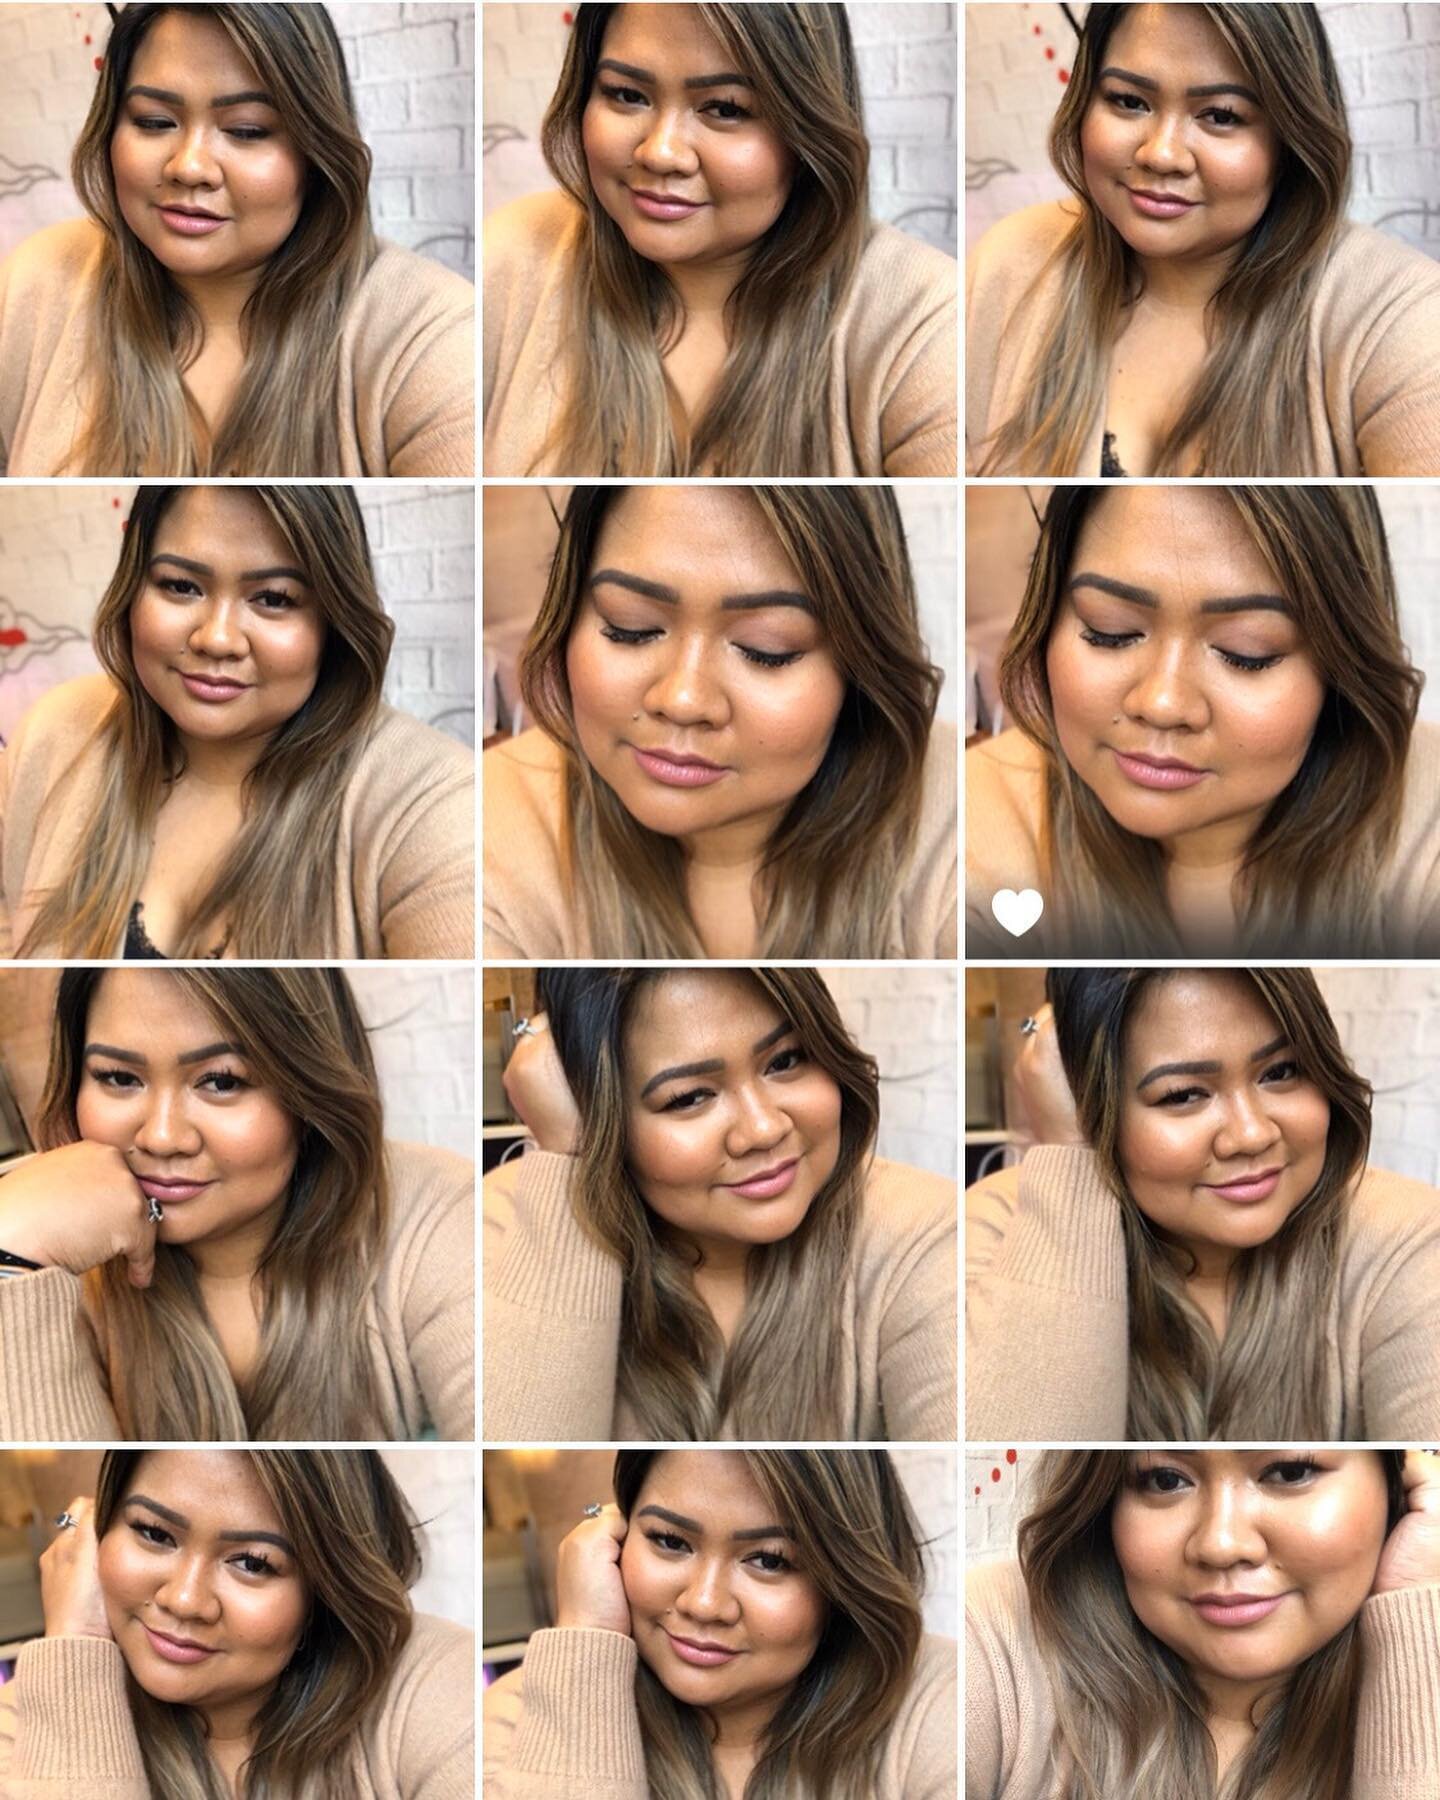 You know you&rsquo;re having a good makeup day when your camera roll looks like this! 😅😝 But really though, I was trying to take a good photo of my makeup because I was trying out the new Tati Beauty Textured Neutrals Palette and loved the way my e